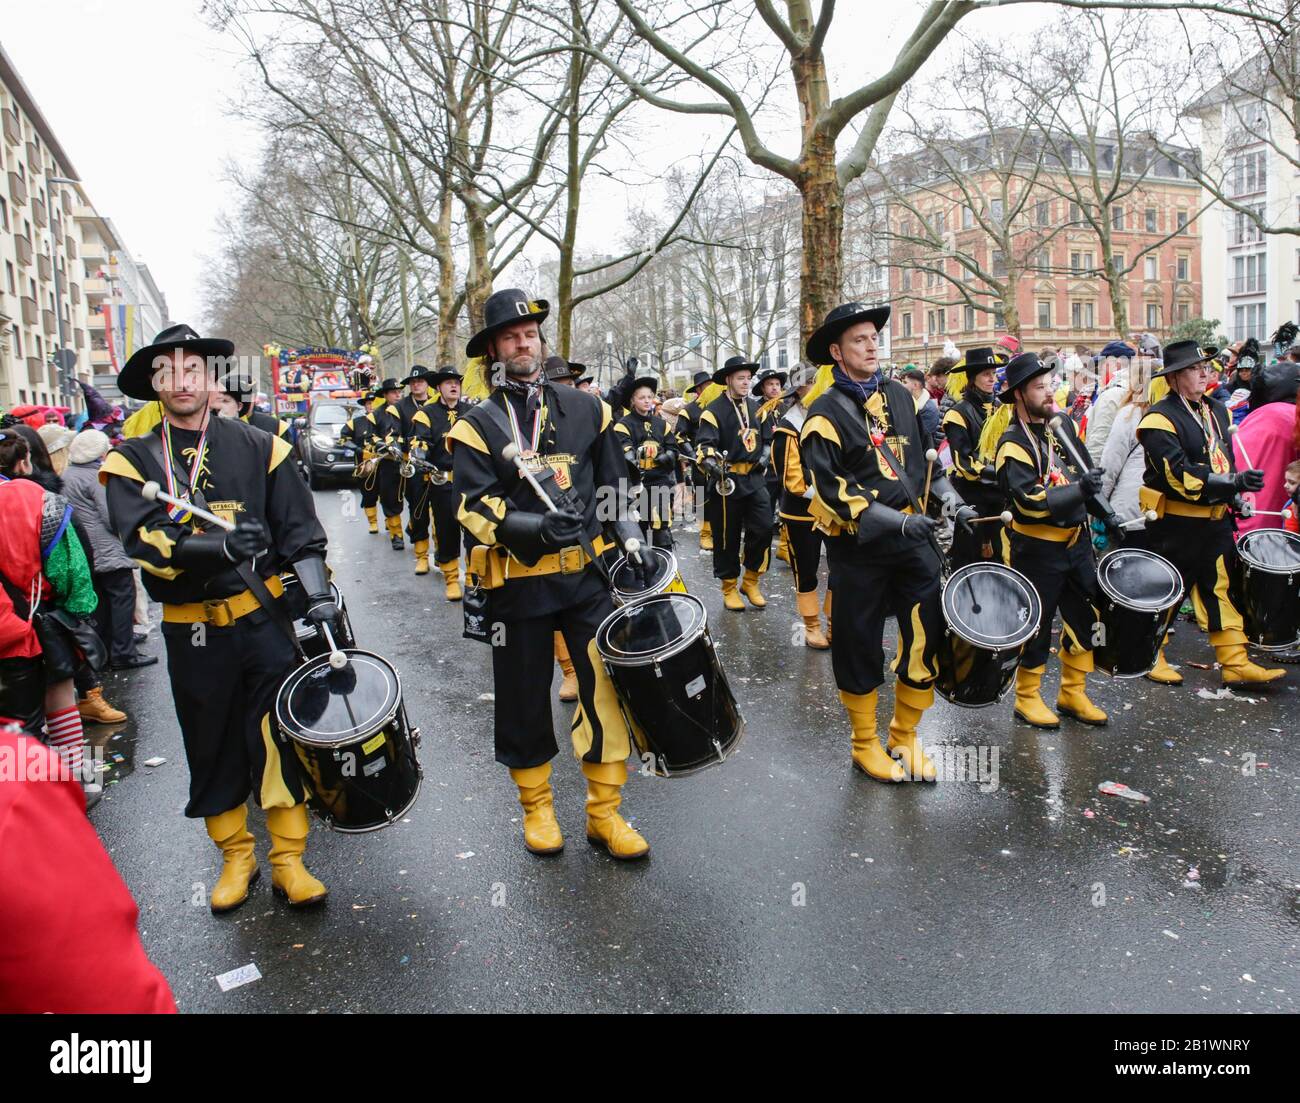 Mainz, Germany. 24th February 2020. Members of the fanfare band Fanfarenzug Bad Wurzach march in the Mainz Rose Monday parade. Around half a million people lined the streets of Mainz for the traditional Rose Monday Carnival Parade. The 9 km long parade with over 9,000 participants is one of the three large Rose Monday Parades in Germany. Stock Photo